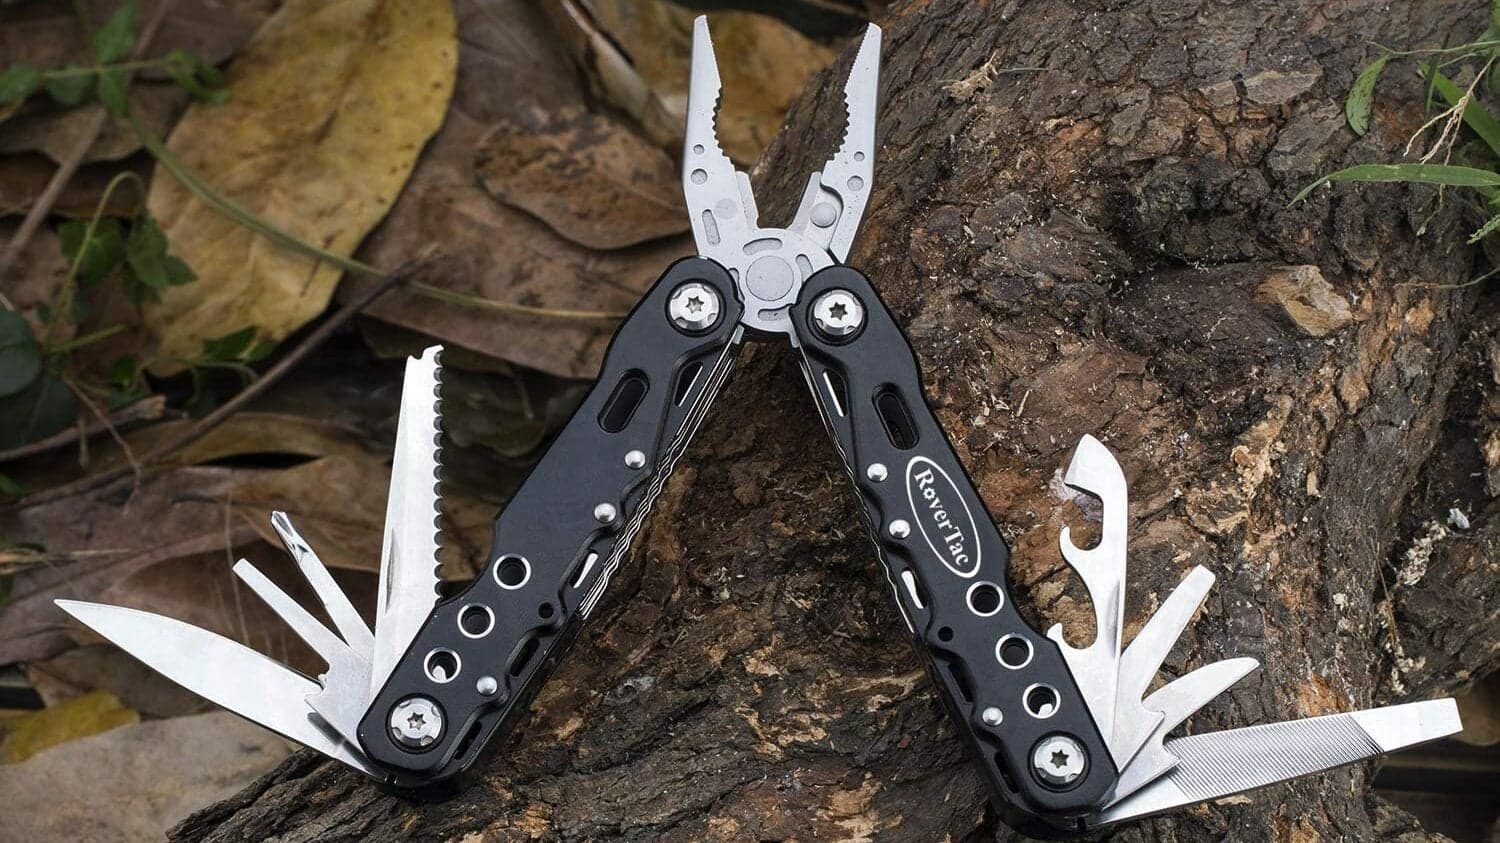 The Best EDC Multitools (Review & Buying Guide) in 2022